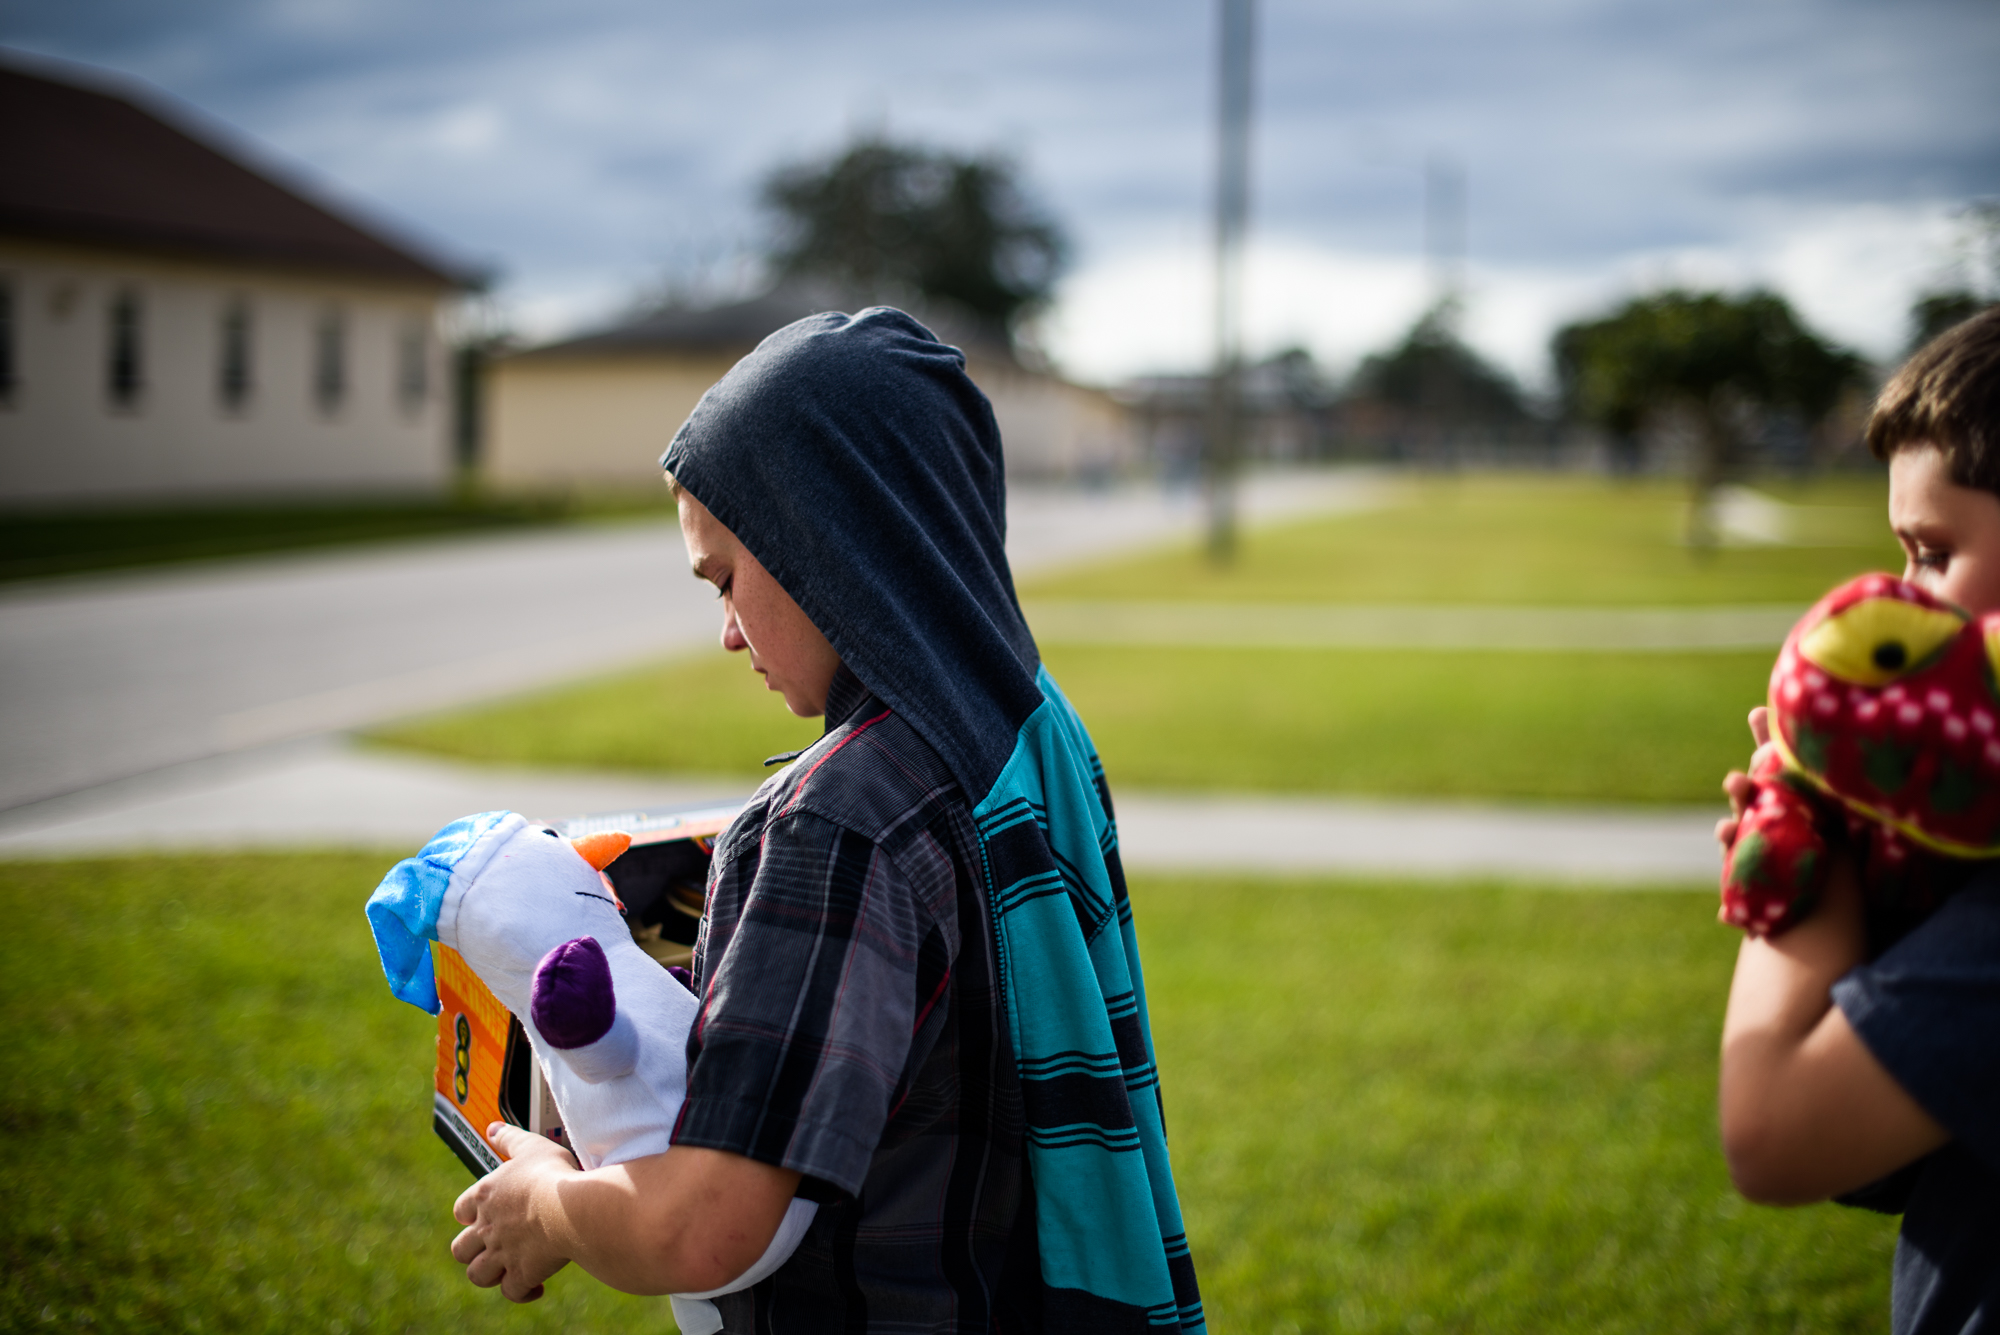  Thomas, age 13, exits the Hernando Correctional Institution in Brooksville, Florida, where his mom, Opal, is incarcerated; Thomas has not seen Opal since she was arrested 4 years prior. 